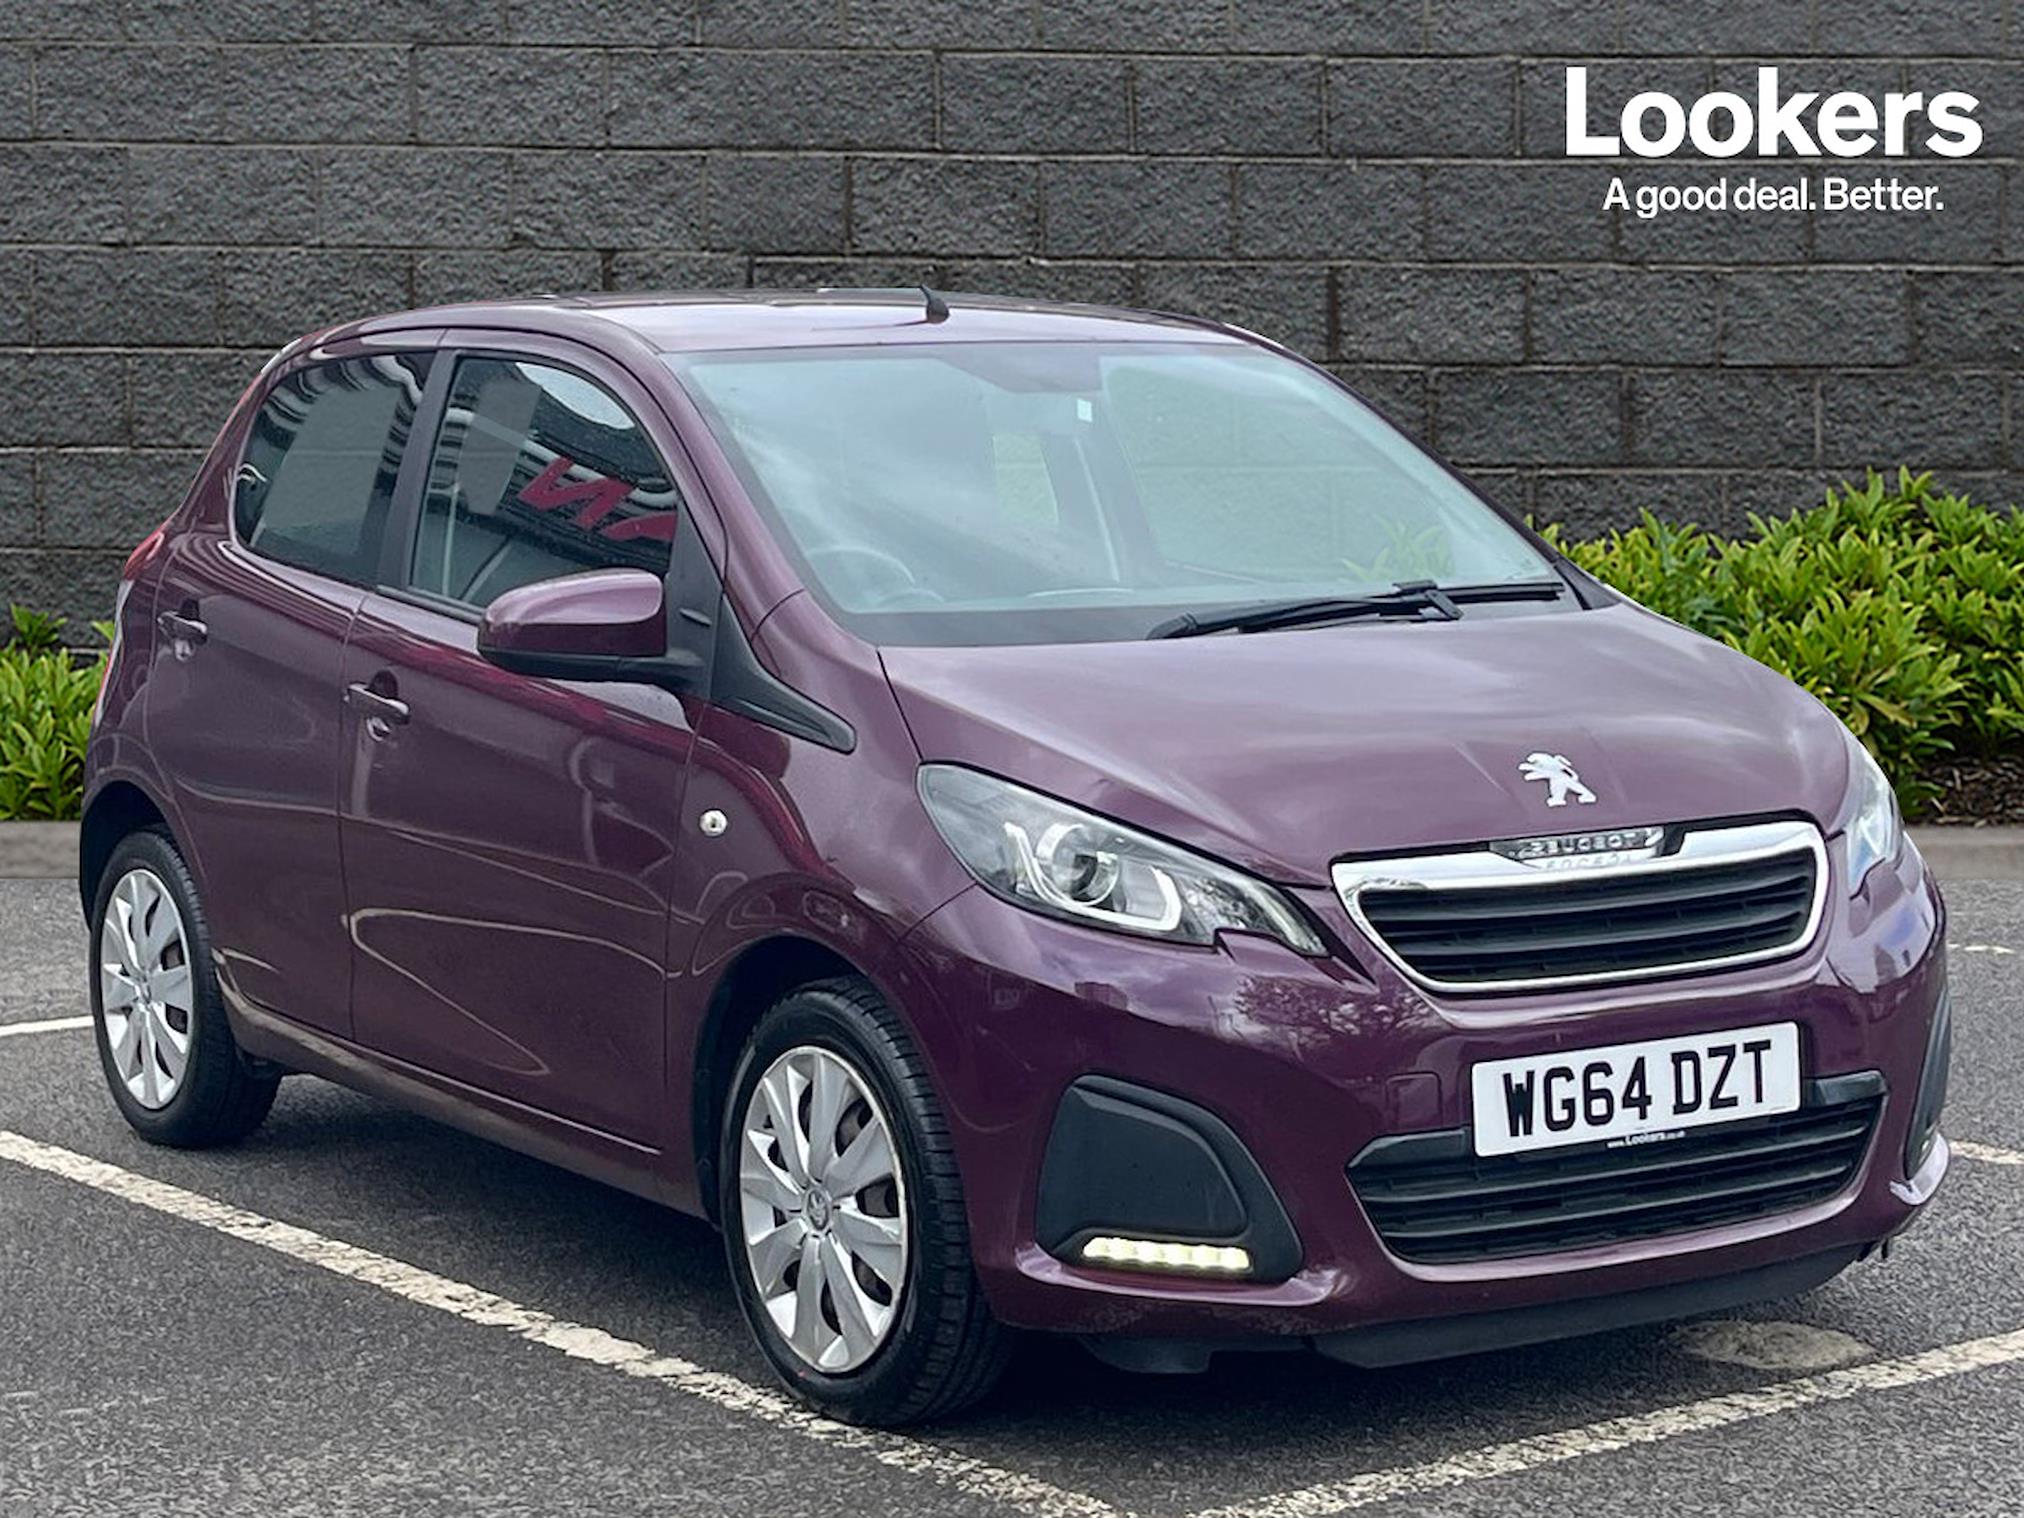 Used PEUGEOT 108 1.0 Active 5Dr 2-Tronic 2014